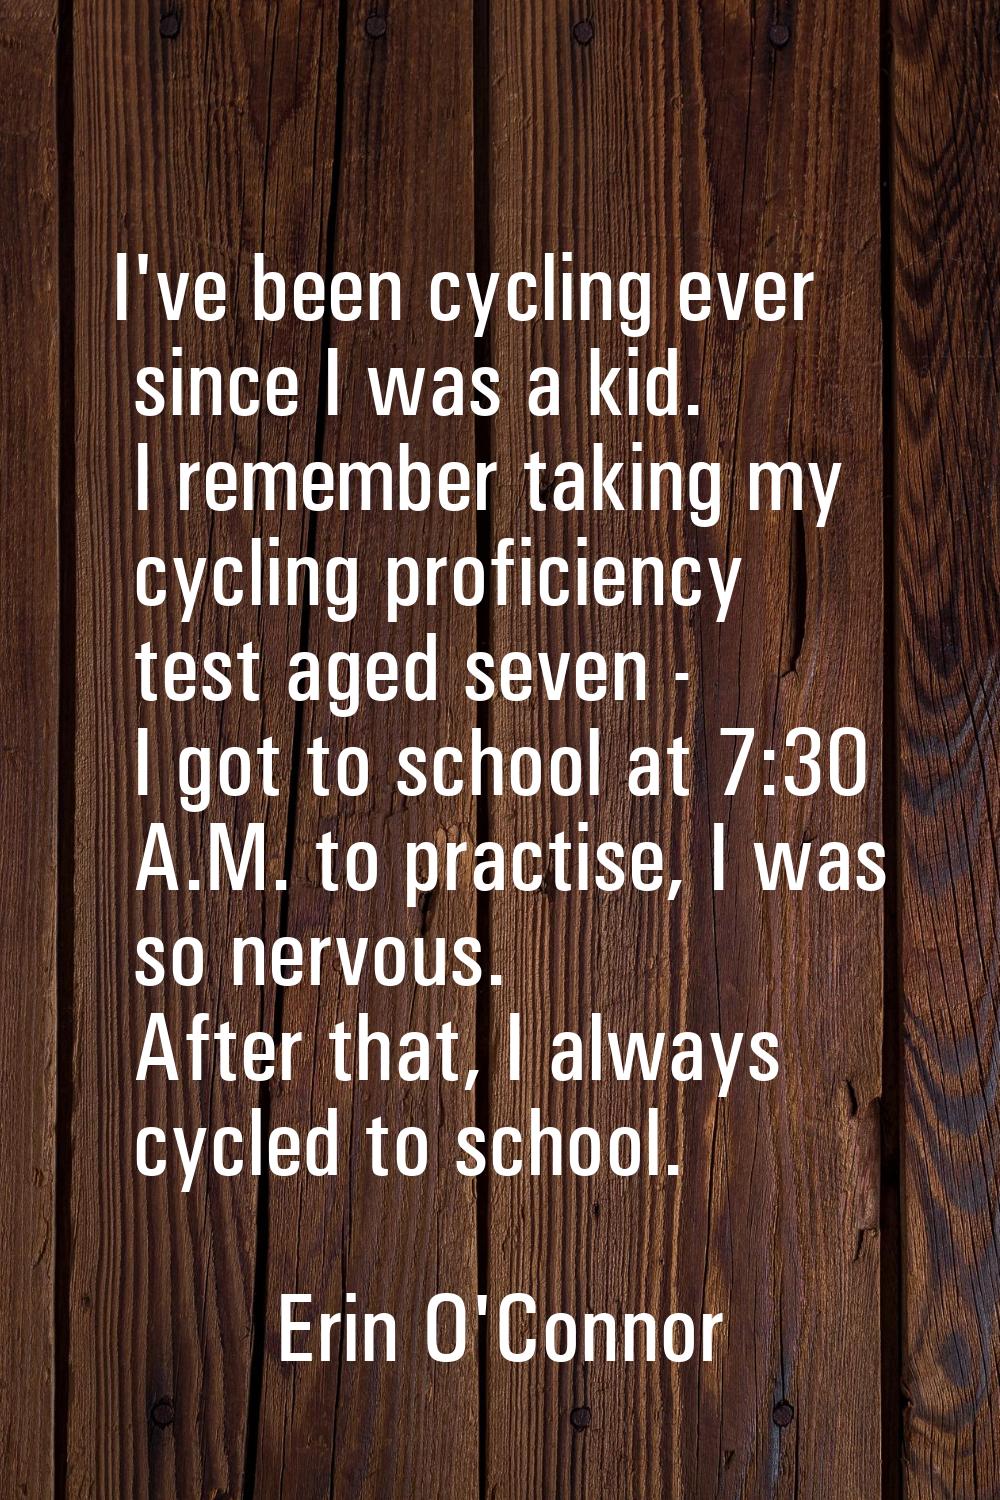 I've been cycling ever since I was a kid. I remember taking my cycling proficiency test aged seven 